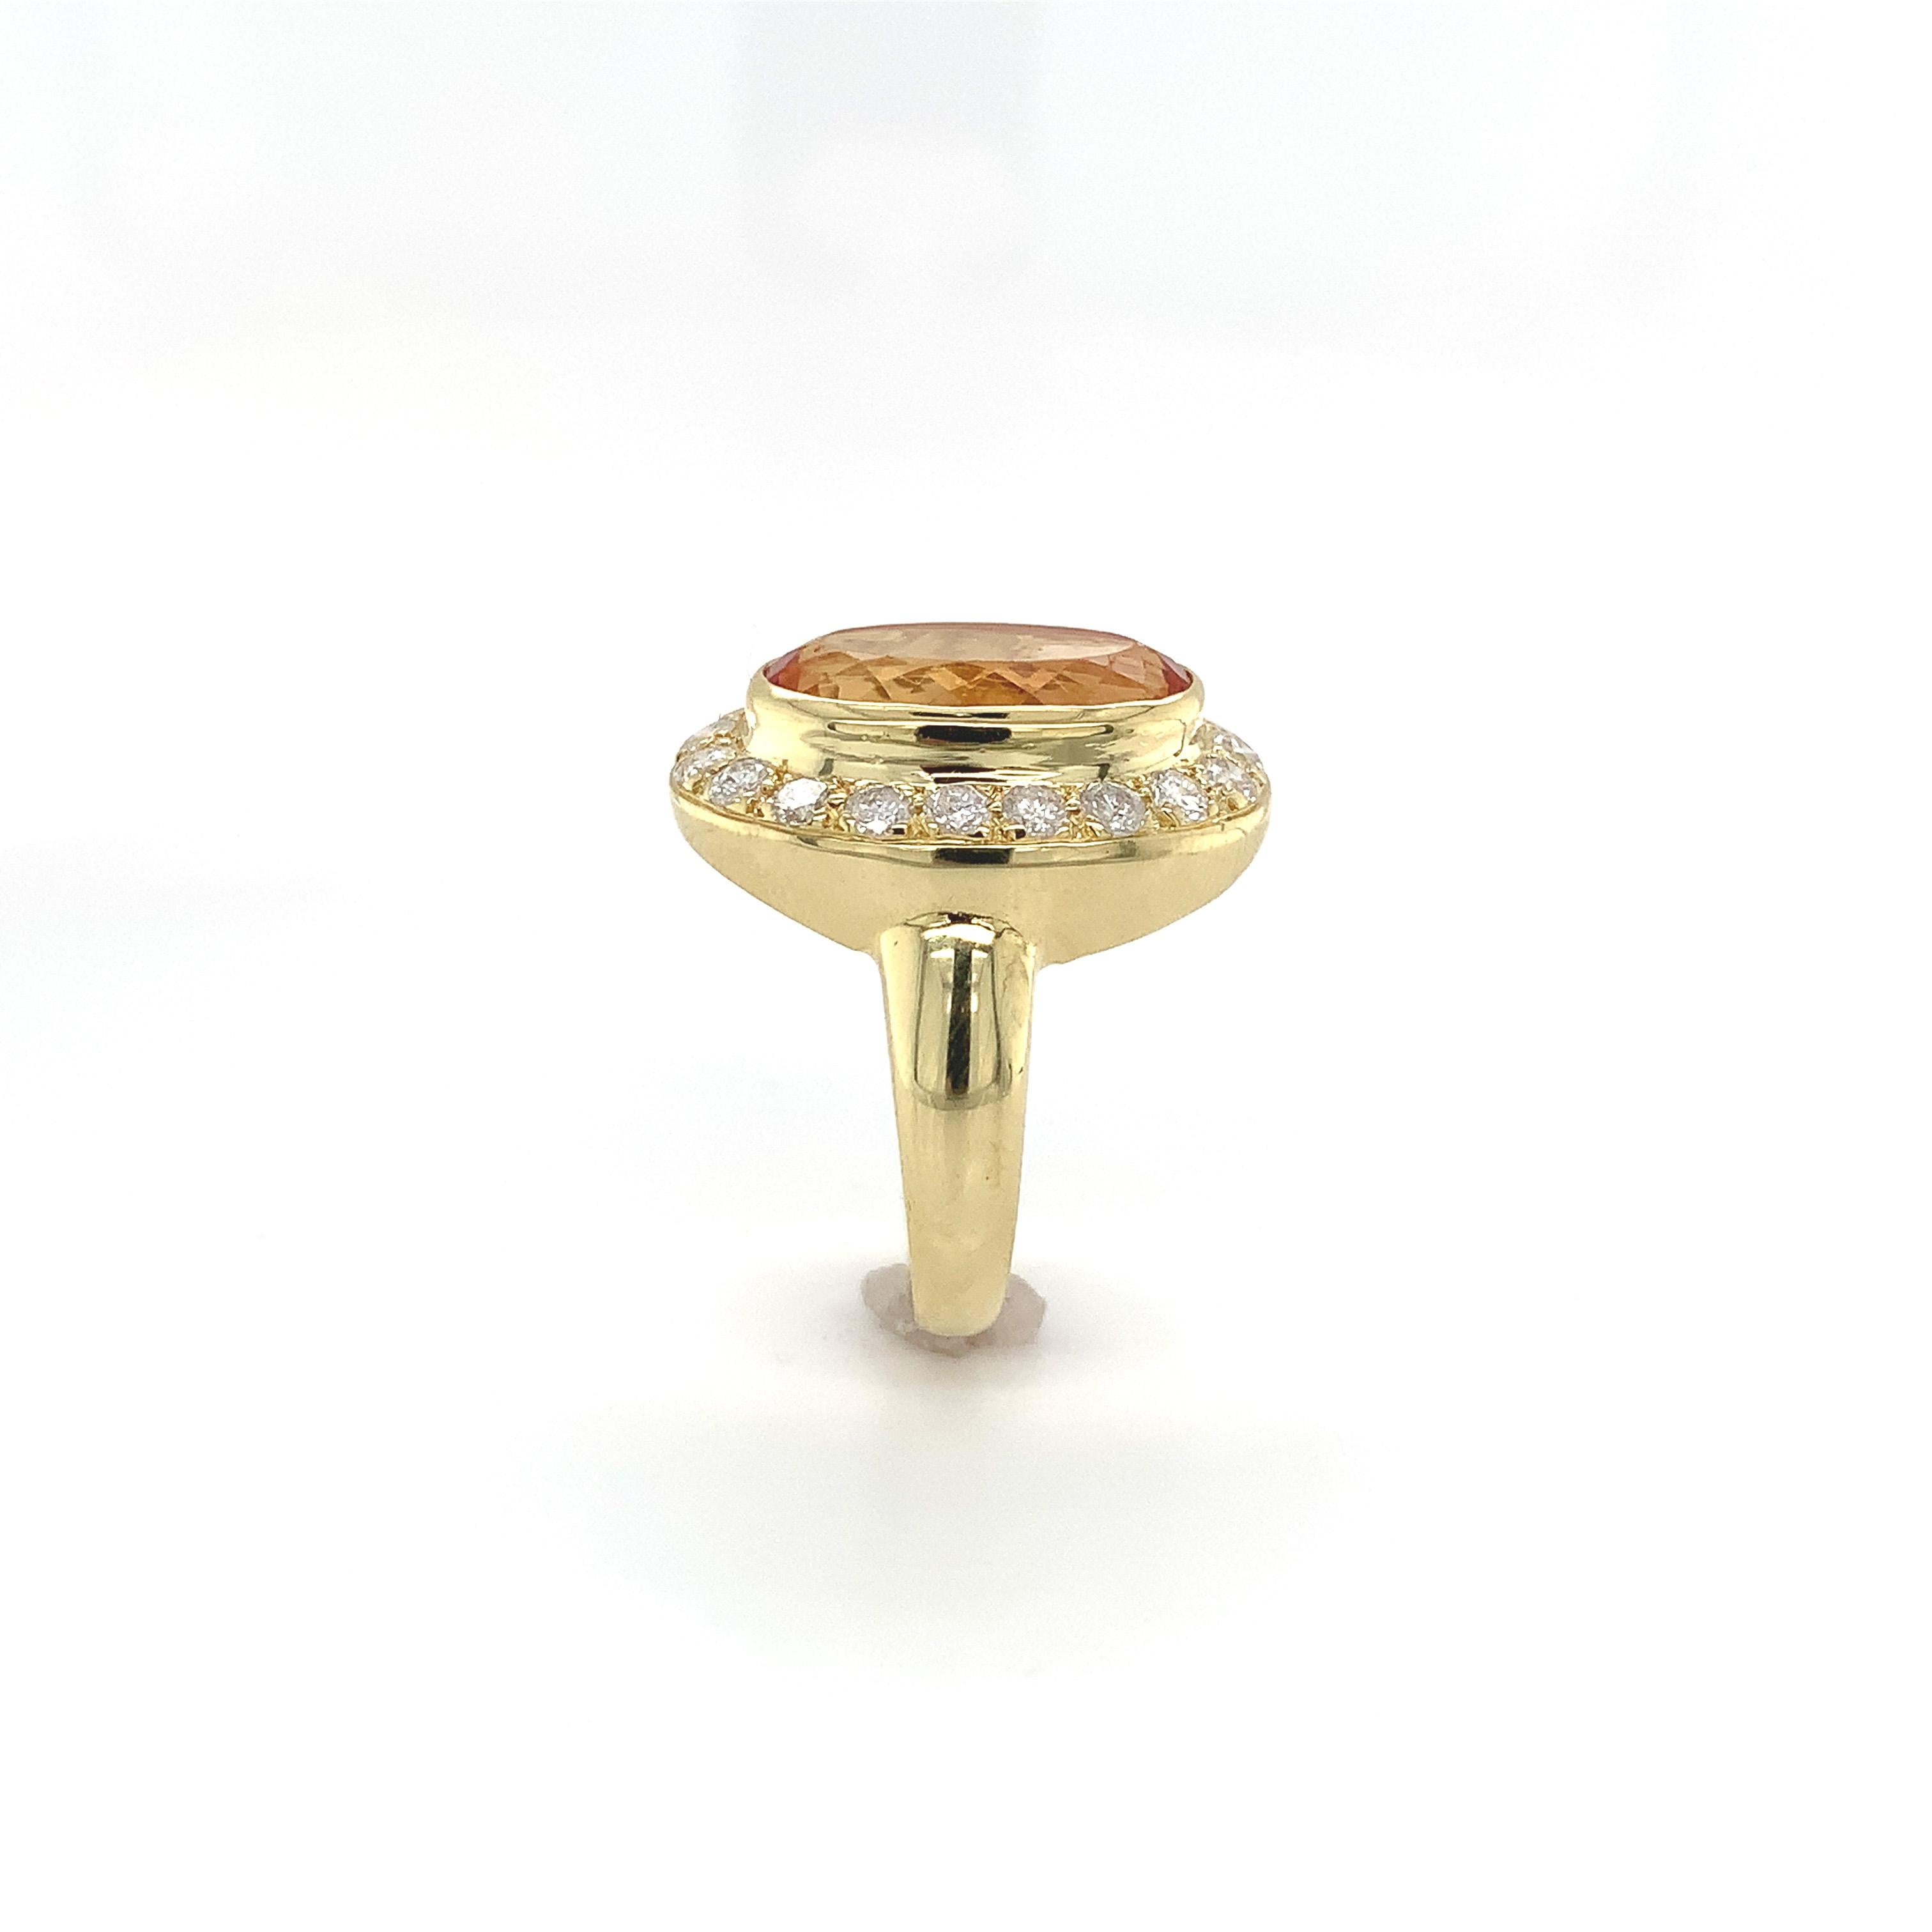 18K yellow gold precious topaz and diamond ring. The long oval precious topaz measures abut 14mm x 9mm and weighs about 5 carats. The topaz has golden yellow-orange color. There are 19 round brilliant cut diamonds weighing about .95ct total. The